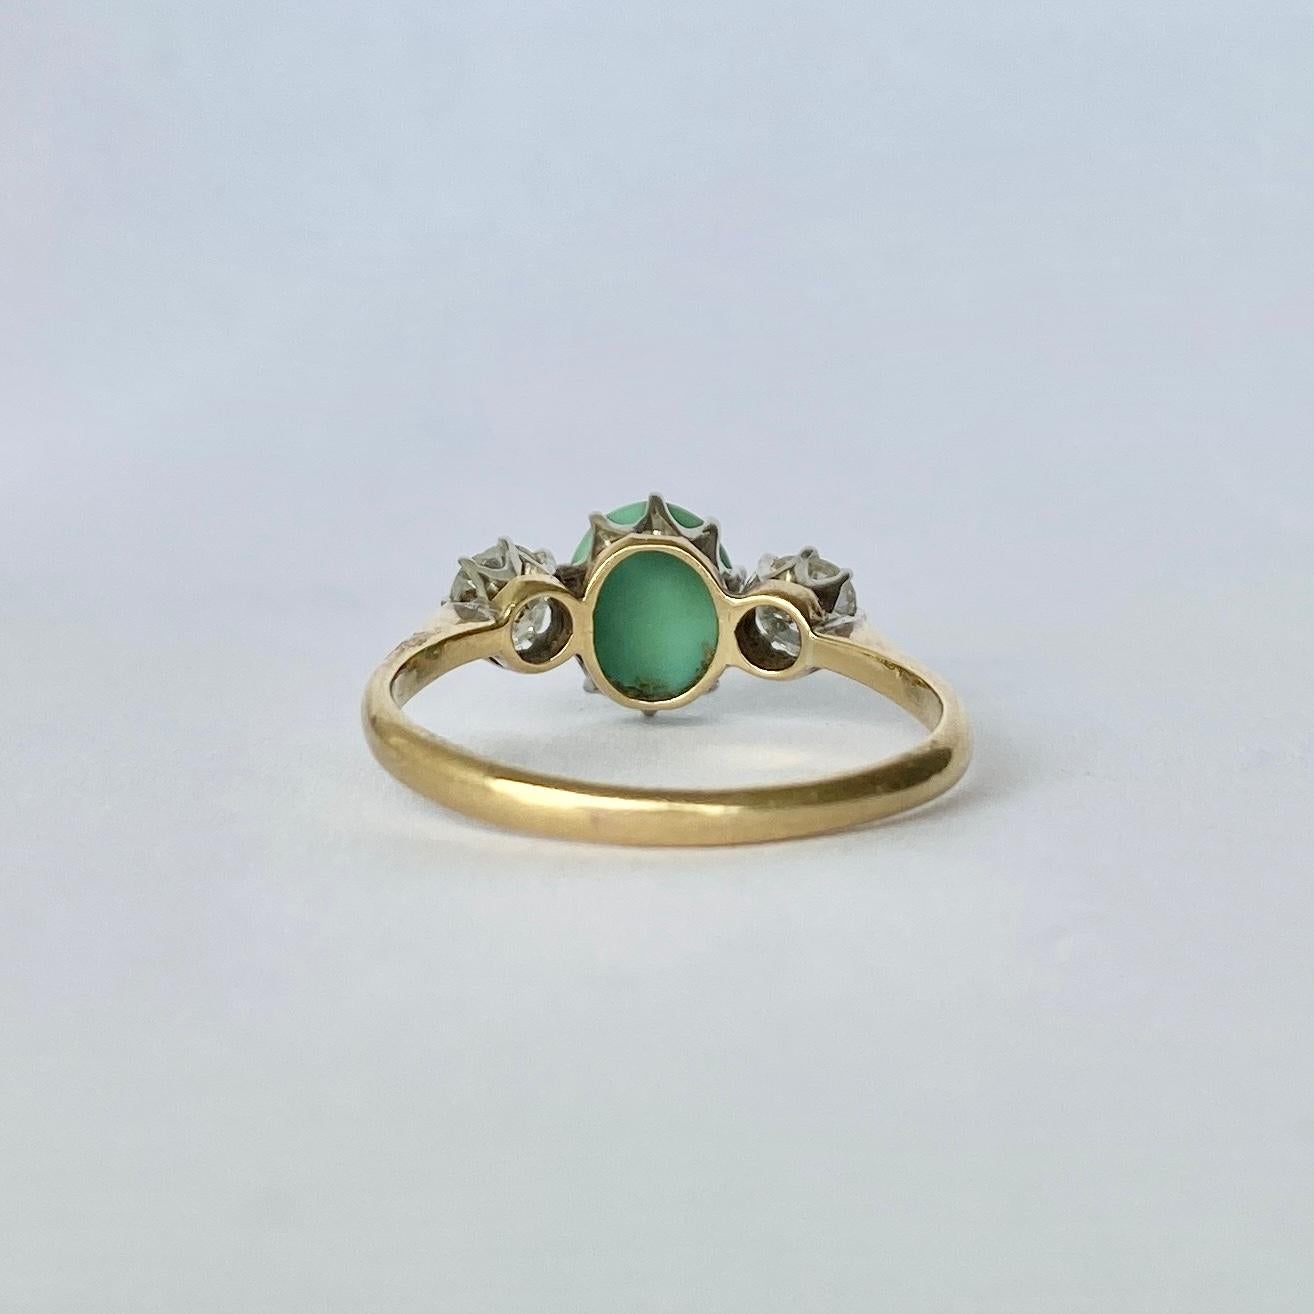 The central stone is a turquoise cabochon and either side it sit two old mine cut diamonds. The diamonds total approx 50pts. The stones are set in platinum and the ring is modelled in 18carat gold. 

Ring Size: O or 7 1/4 
Height Off Finger: